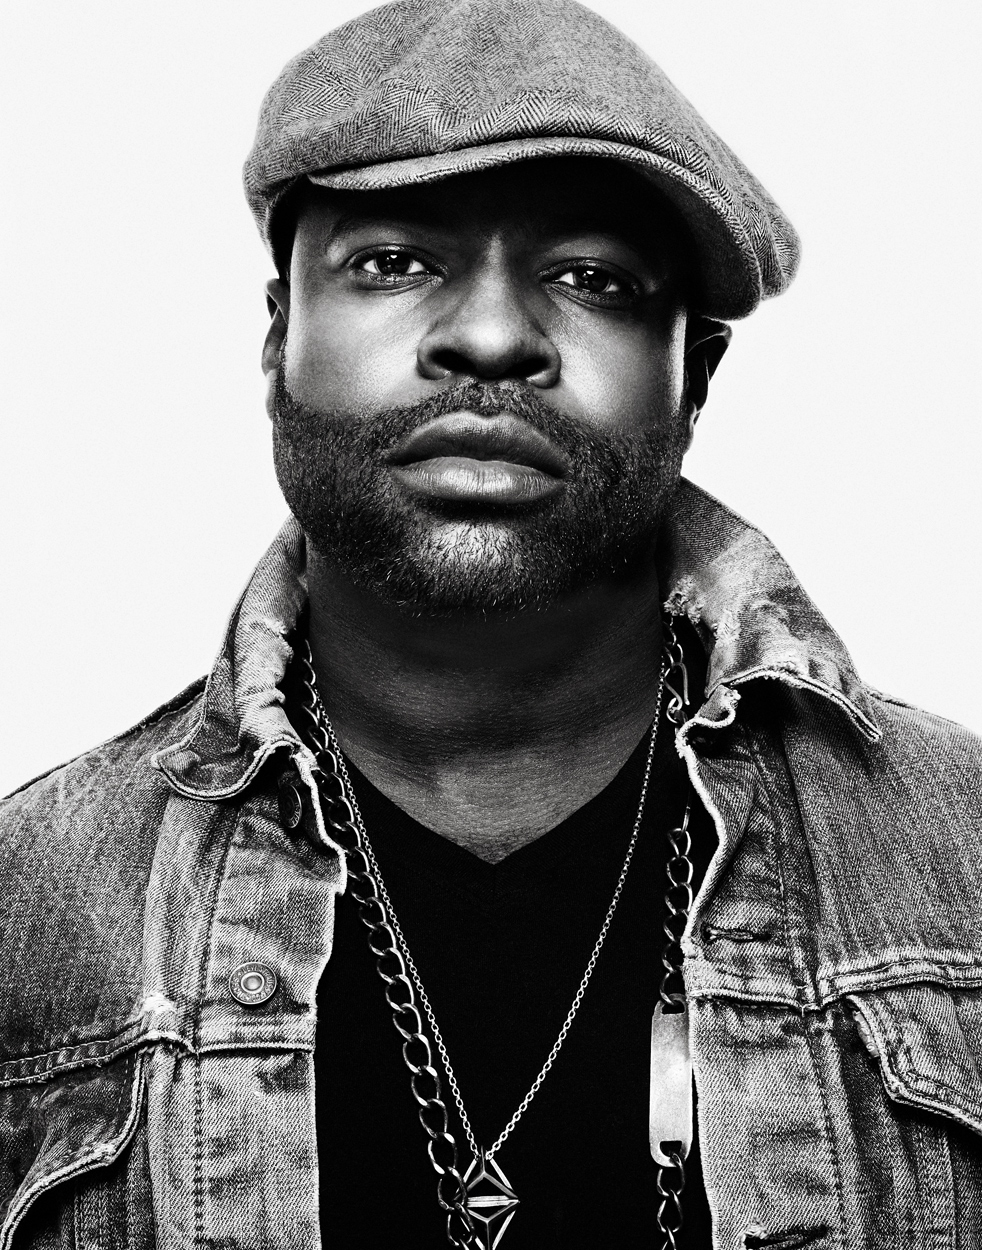 Celebrity Photographer Michael Schwartz: Tariq "Black Thought" Trotter of The Roots